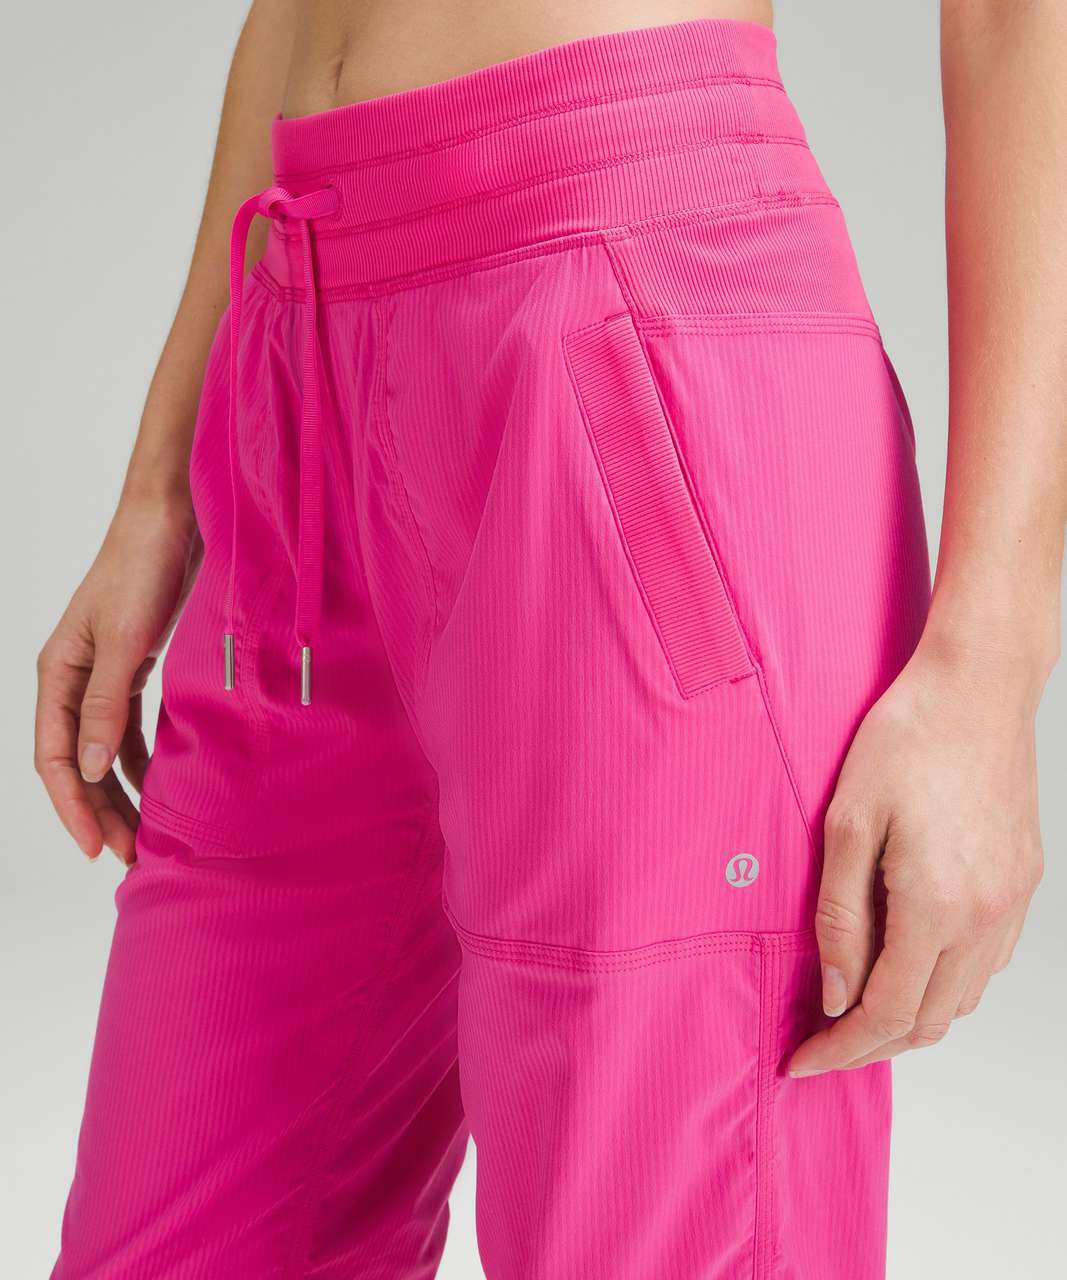 NWT Lululemon Dance Studio Mid-Rise Pant Size 4 Sonic Pink 32” Sold Out! 